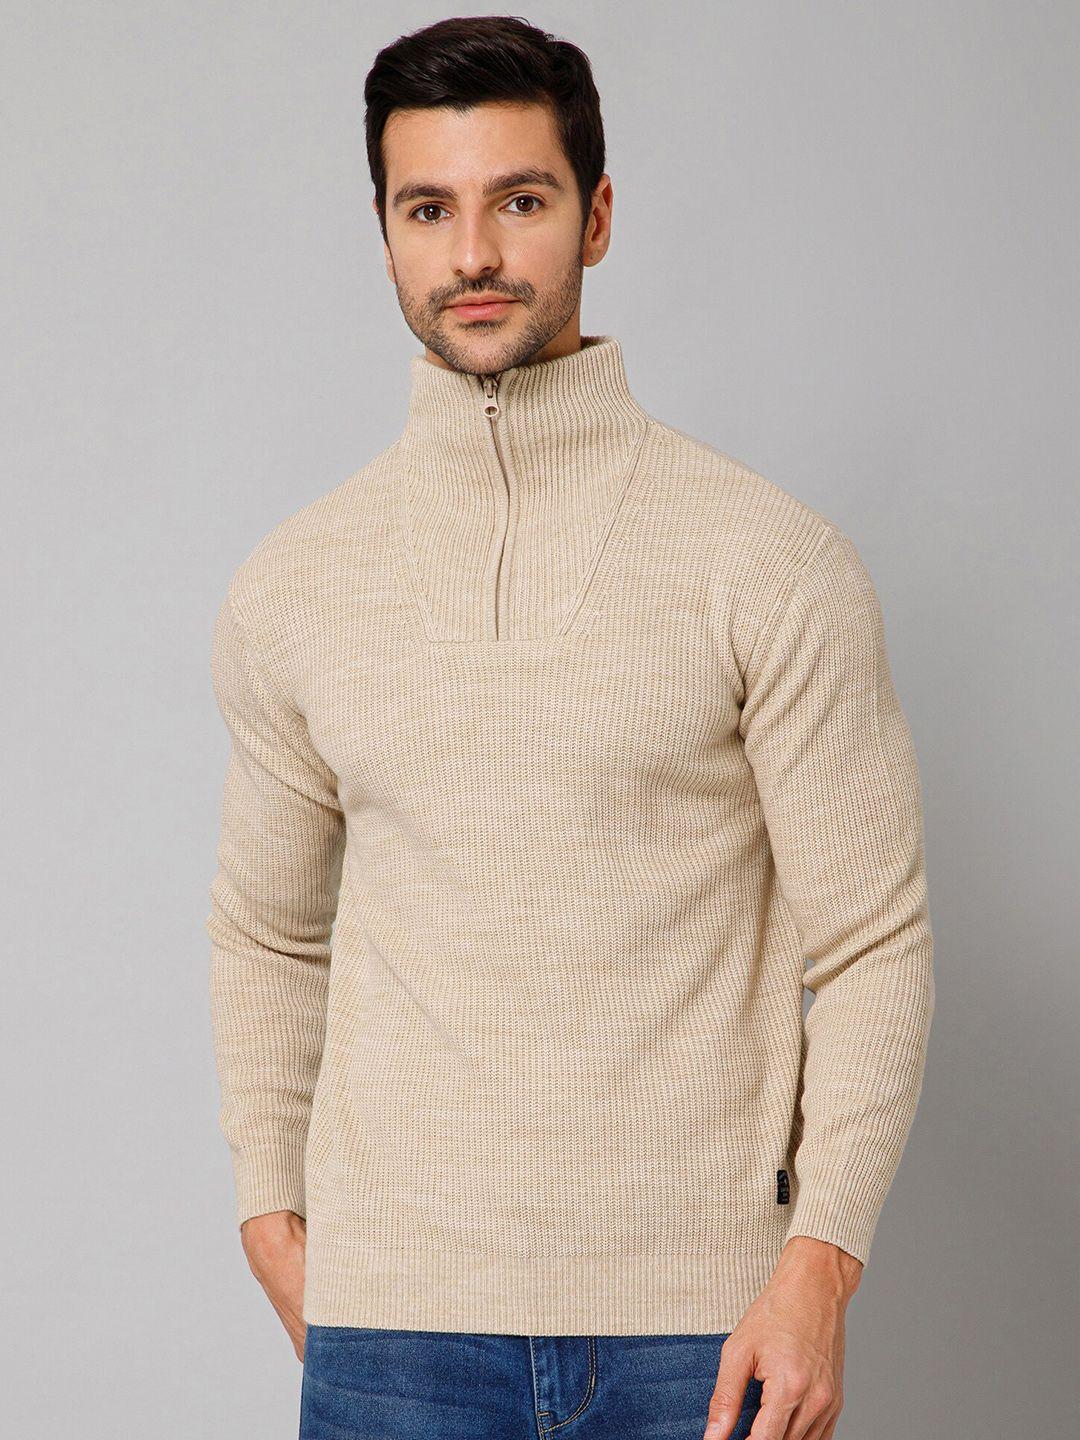 cantabil ribbed turtle neck long sleeves zip detail acrylic sweater